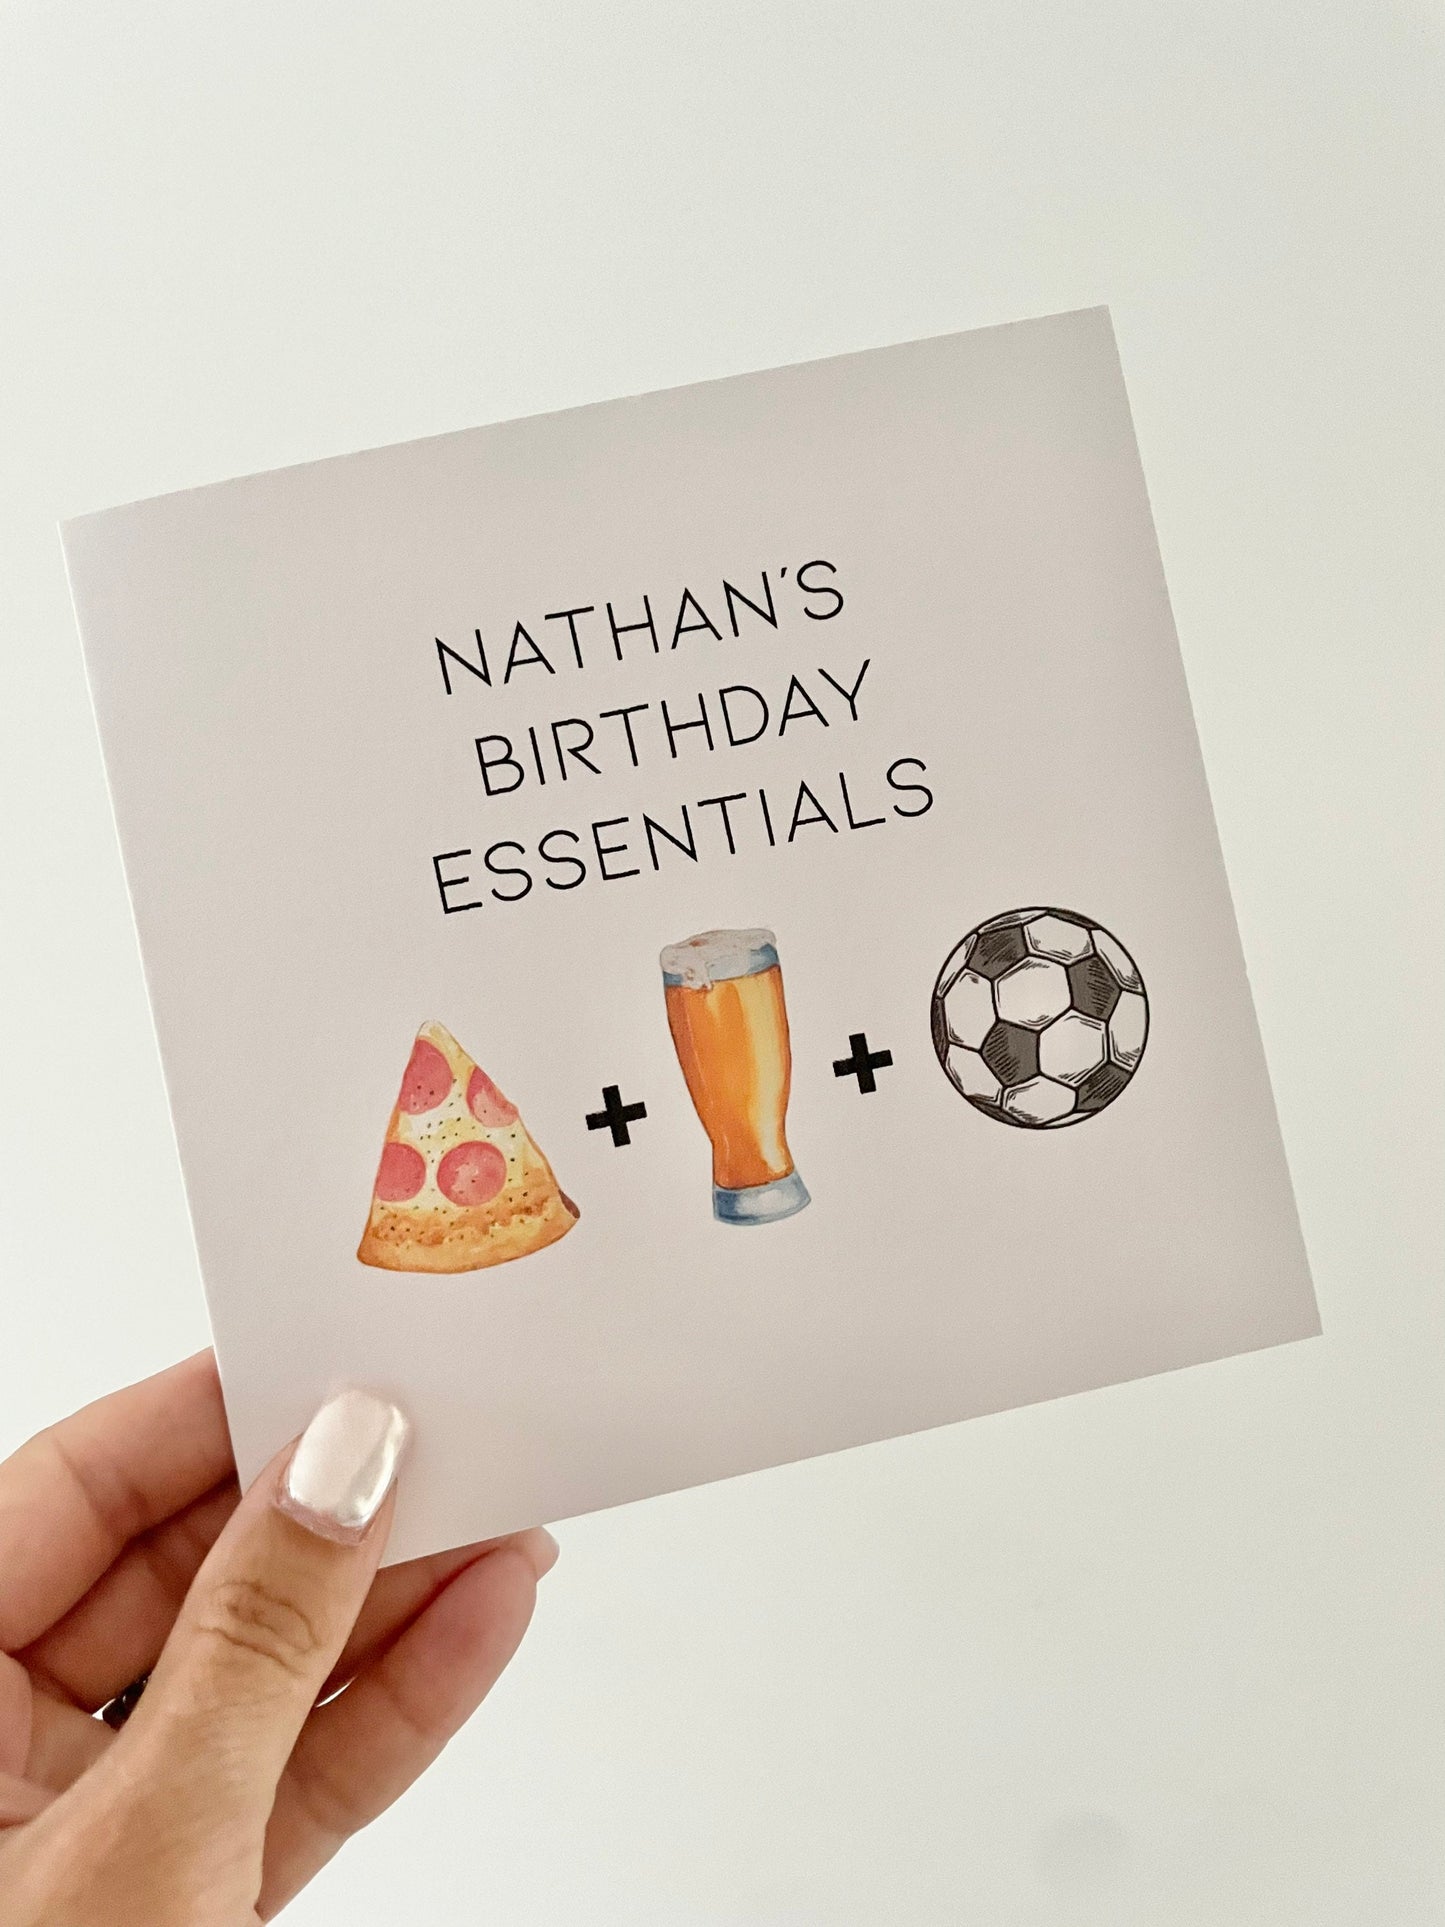 Personalised birthday Card for boyfriend, husband, brother, son, dad. Pizza, beer, football theme card for men